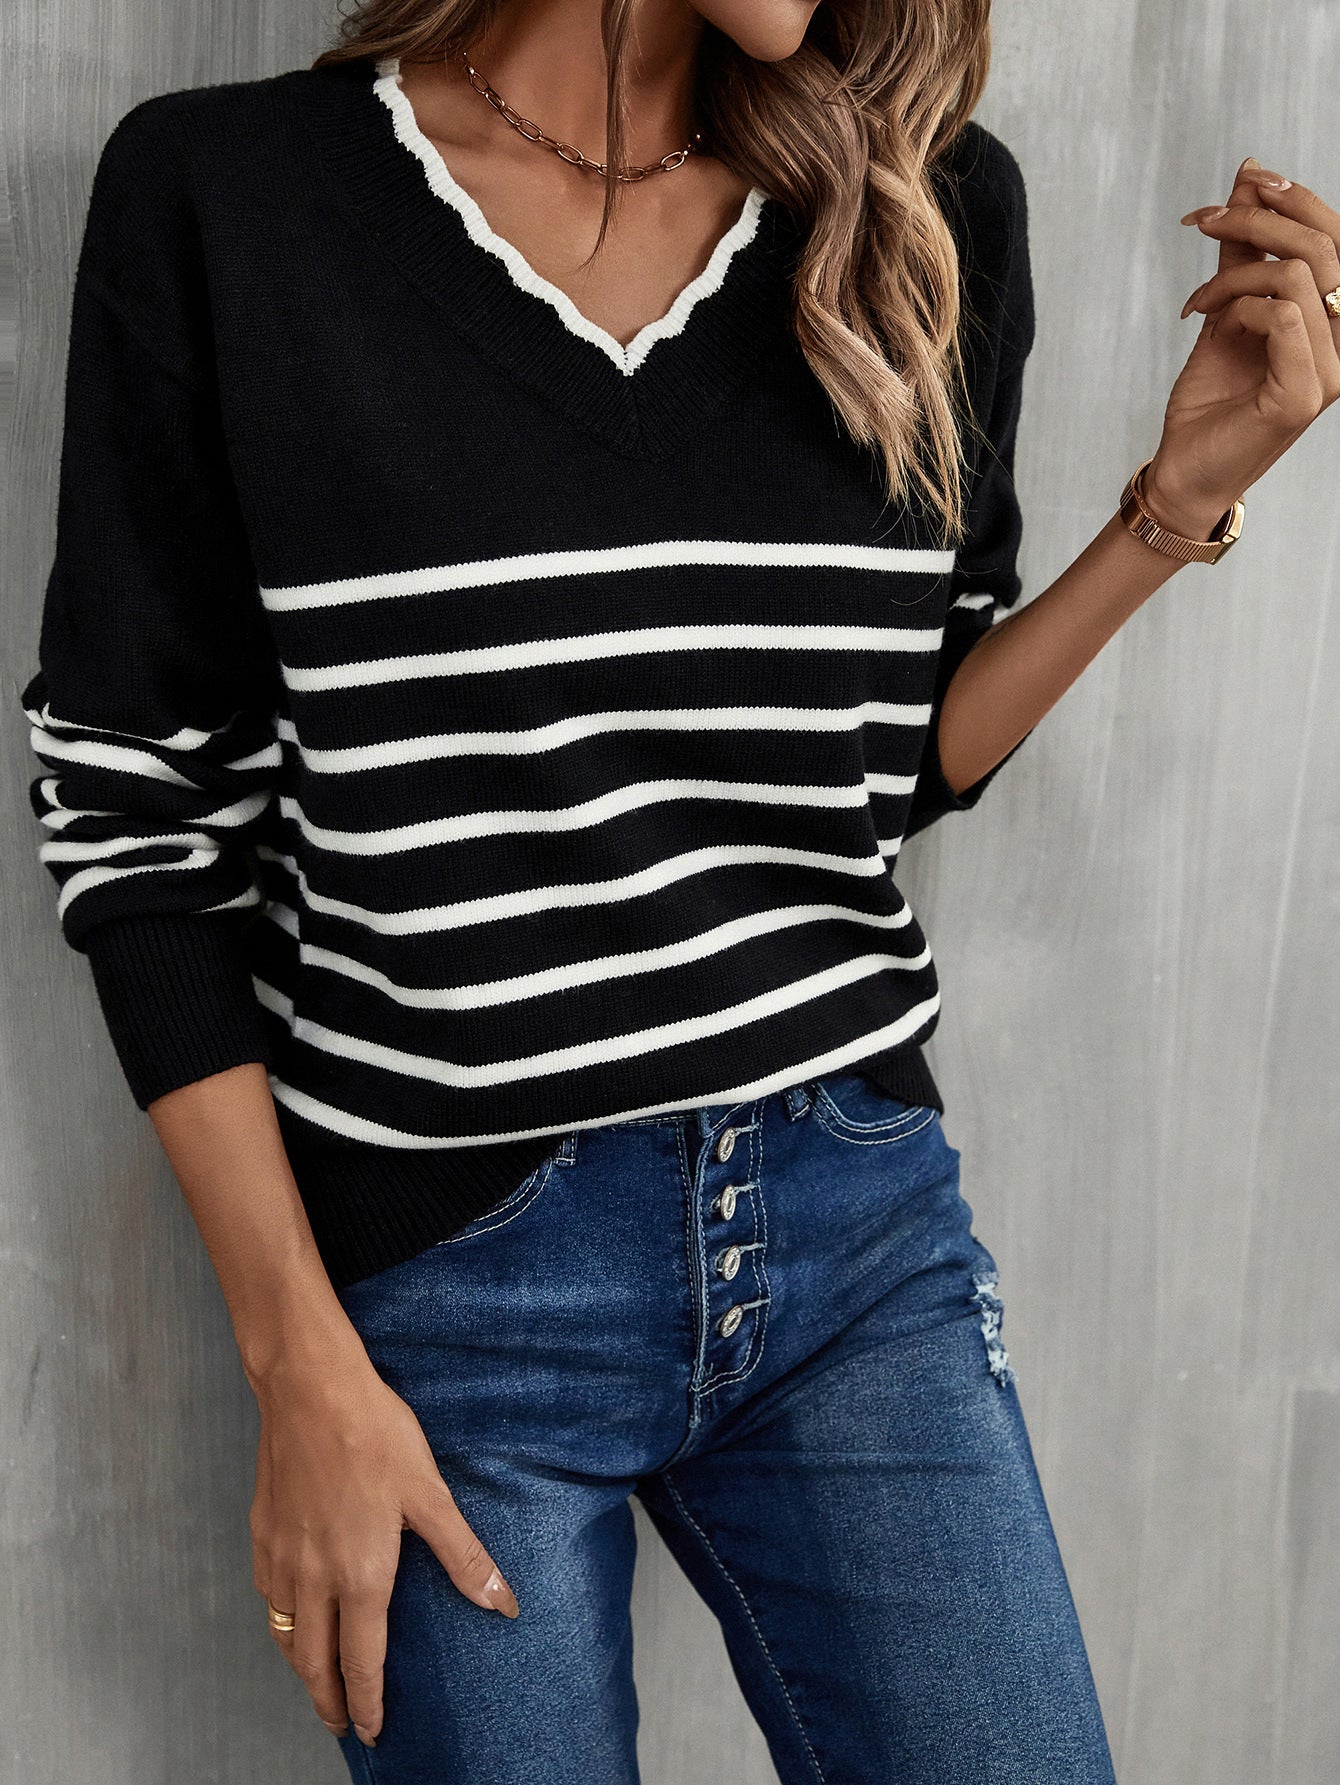 Fashion Women's Pullover Shirt V-neck Striped Sweaters